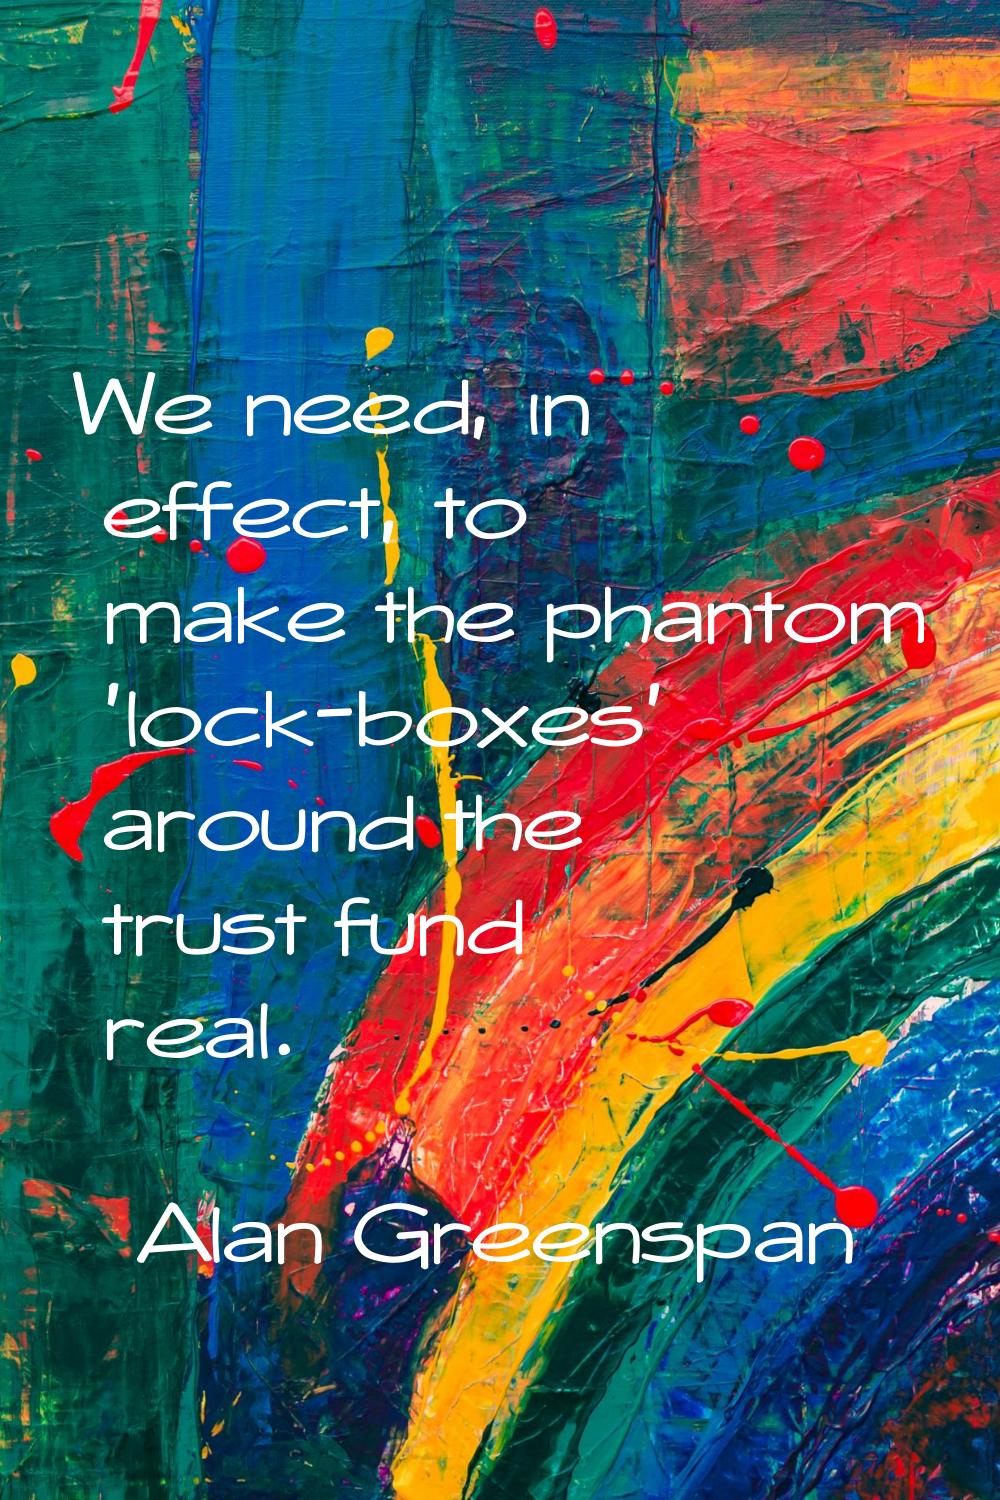 We need, in effect, to make the phantom 'lock-boxes' around the trust fund real.